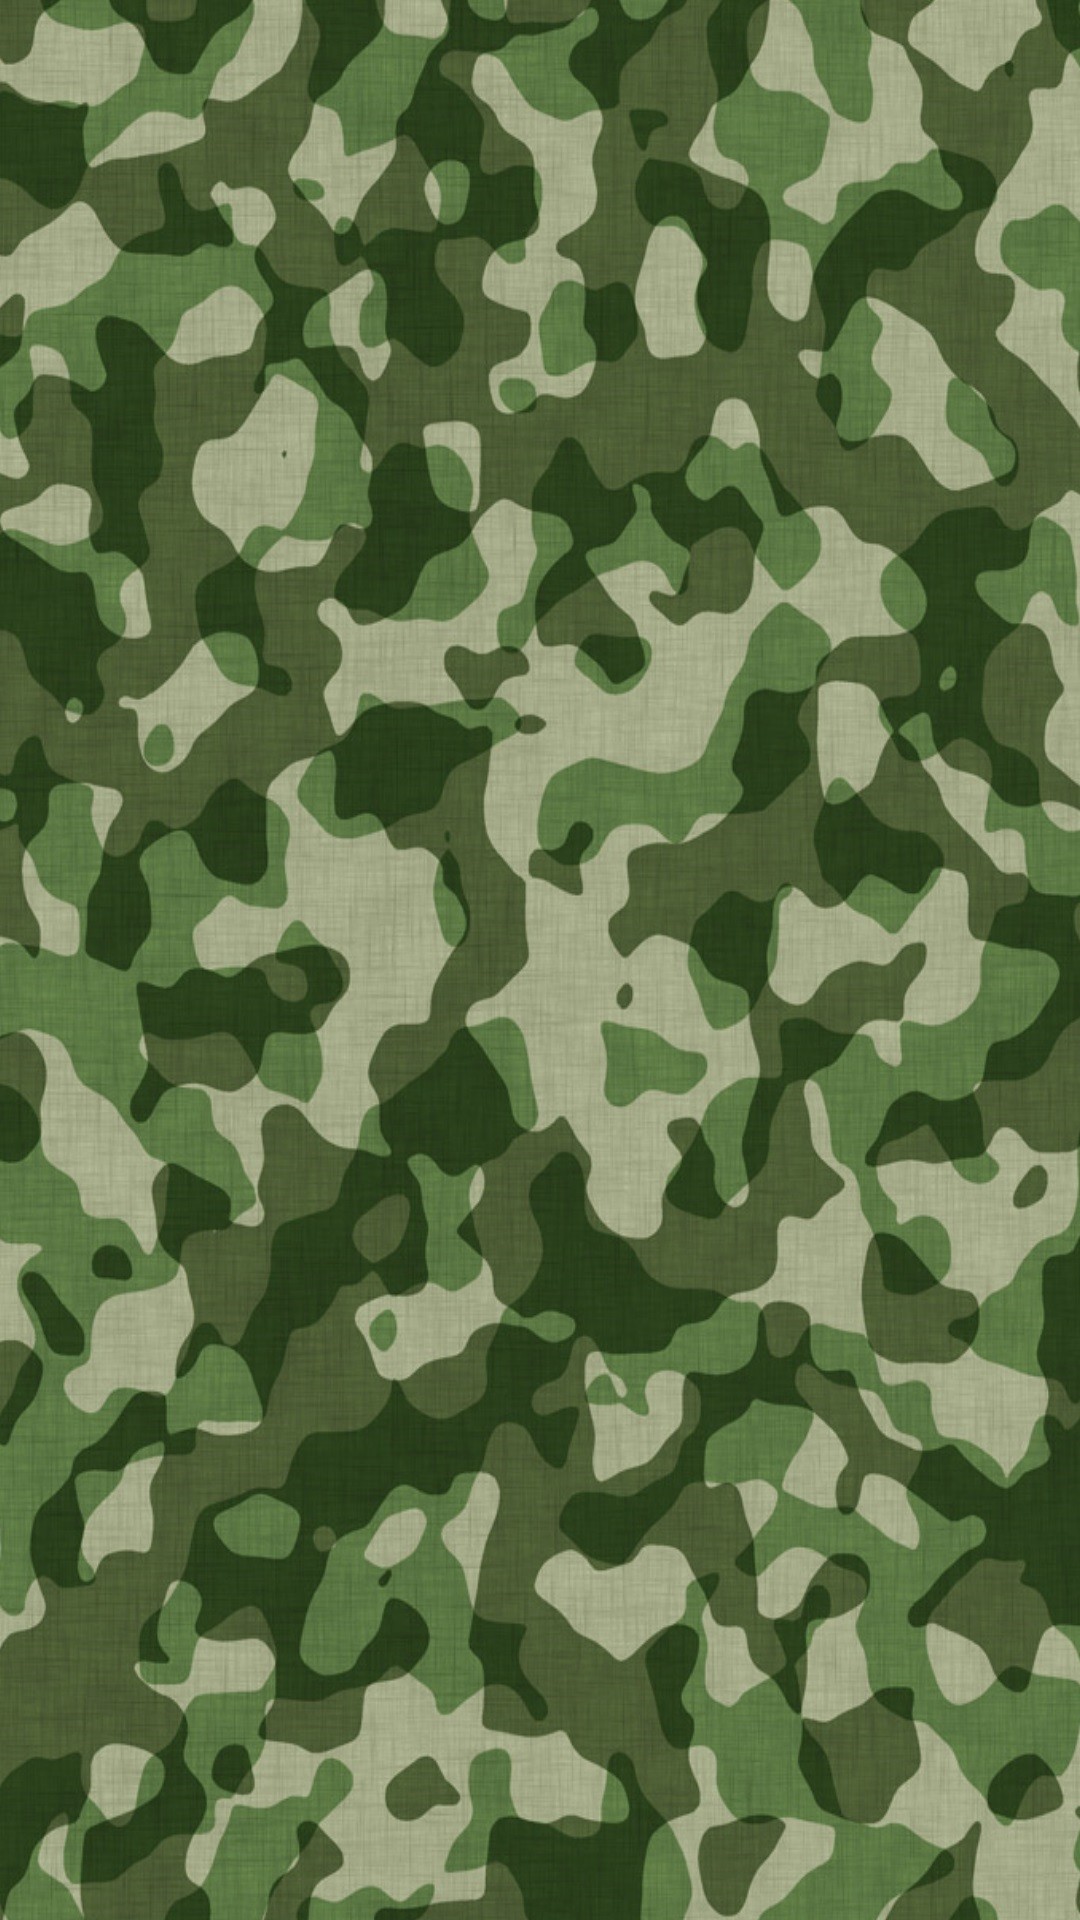 Camouflage wallpaper for iPhone or Android. Tags camo, hunting, army, backgrounds